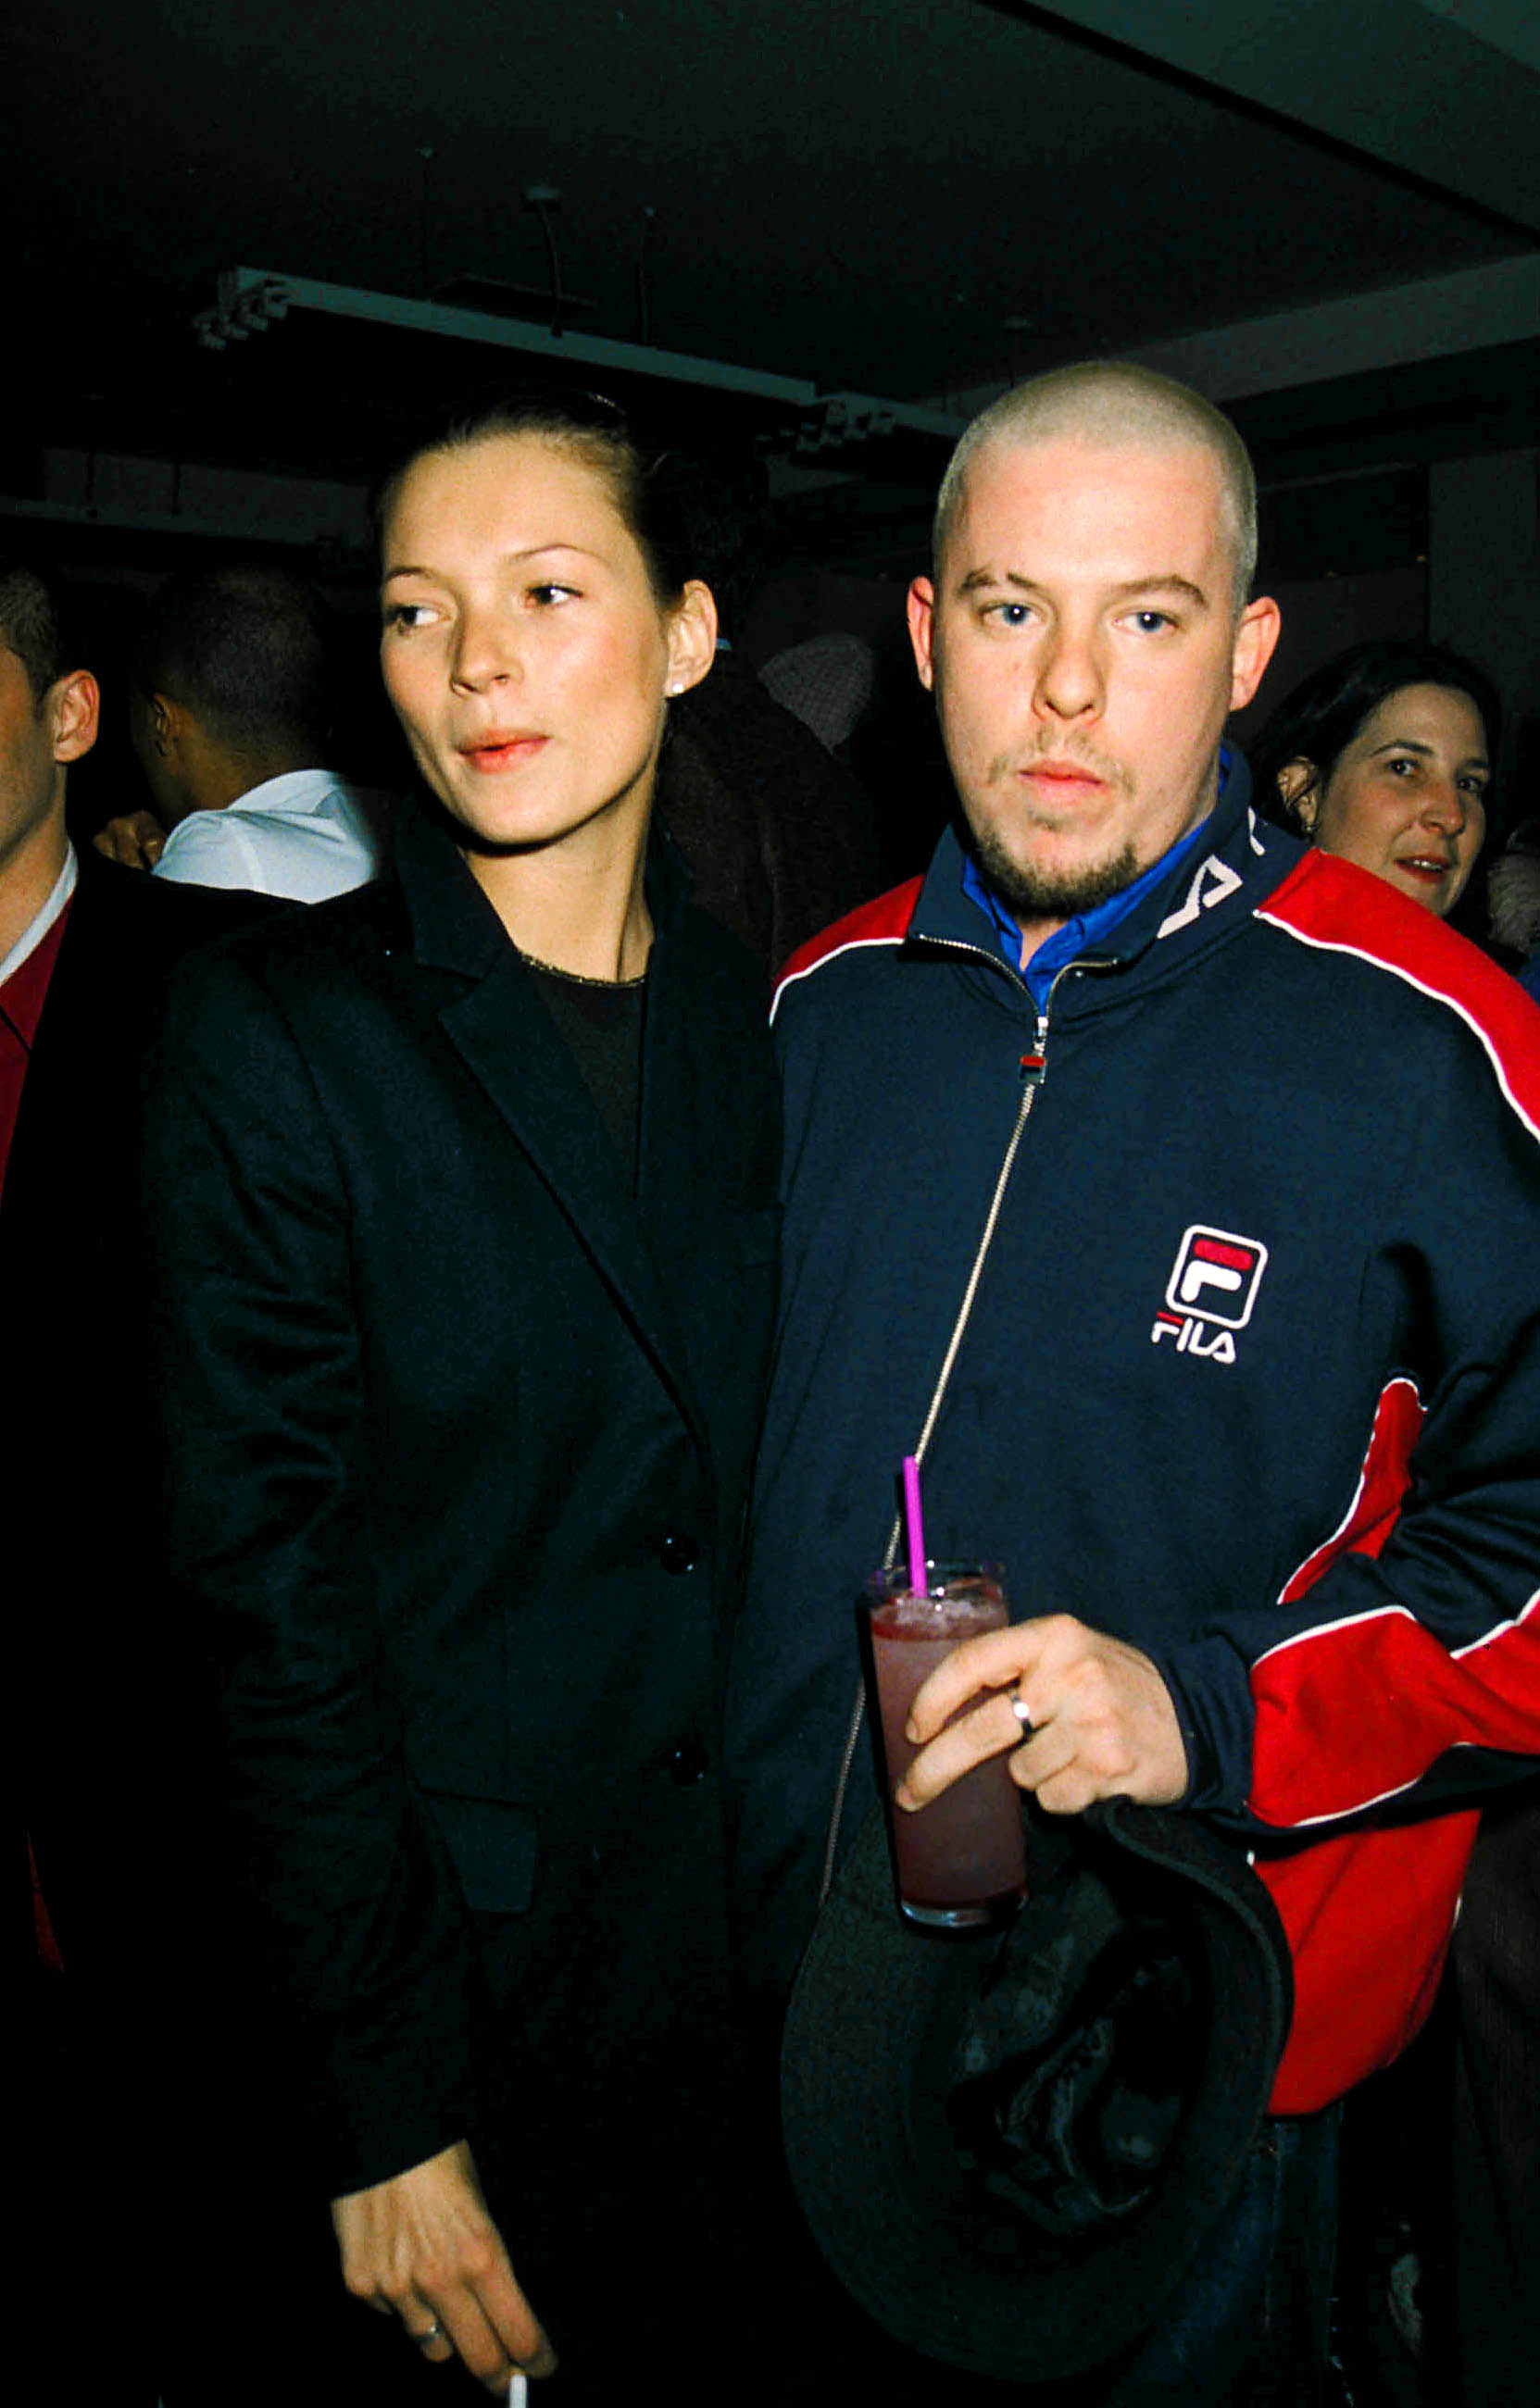 A slender white model with her hair pulled back standing close to a white man with close-shaved head and goatee.